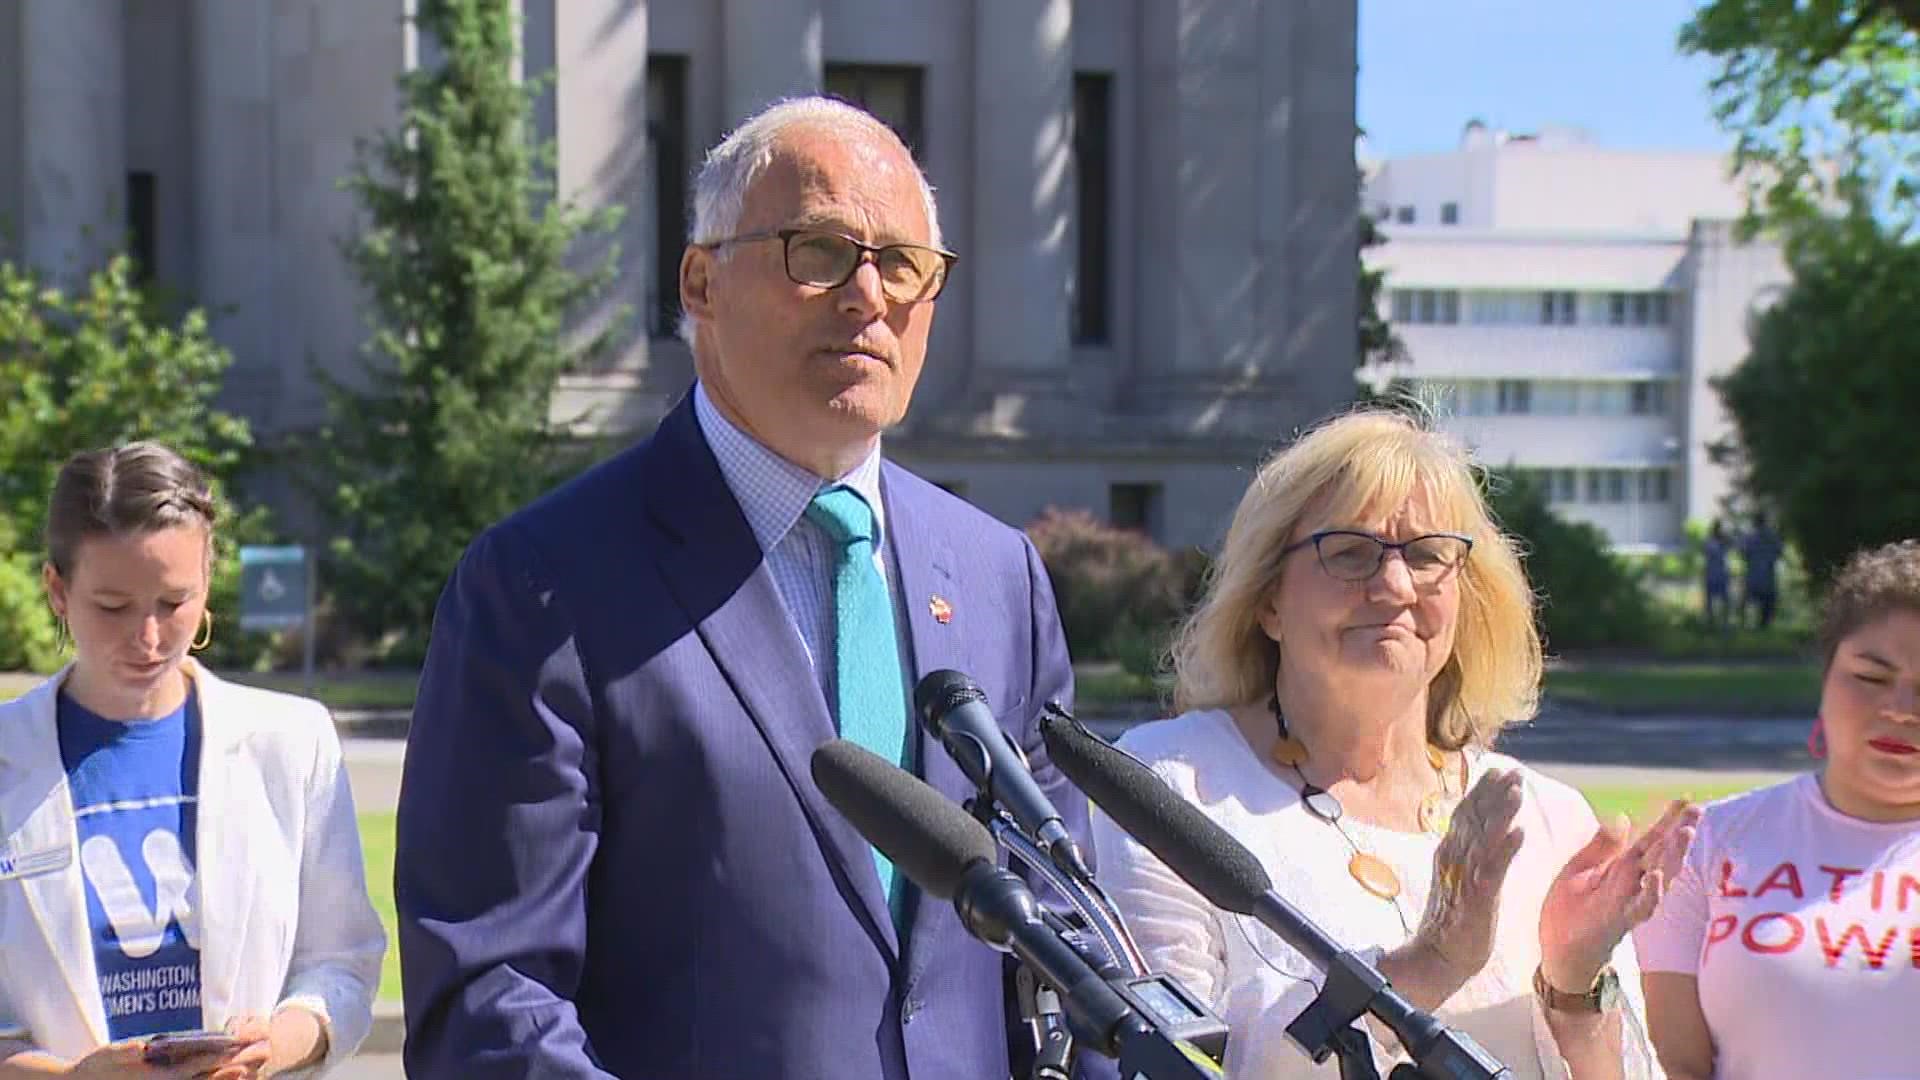 Washington Gov. Jay Inslee announced how the state intends to shield patients who travel to seek abortions from being pursued by authorities in other states.